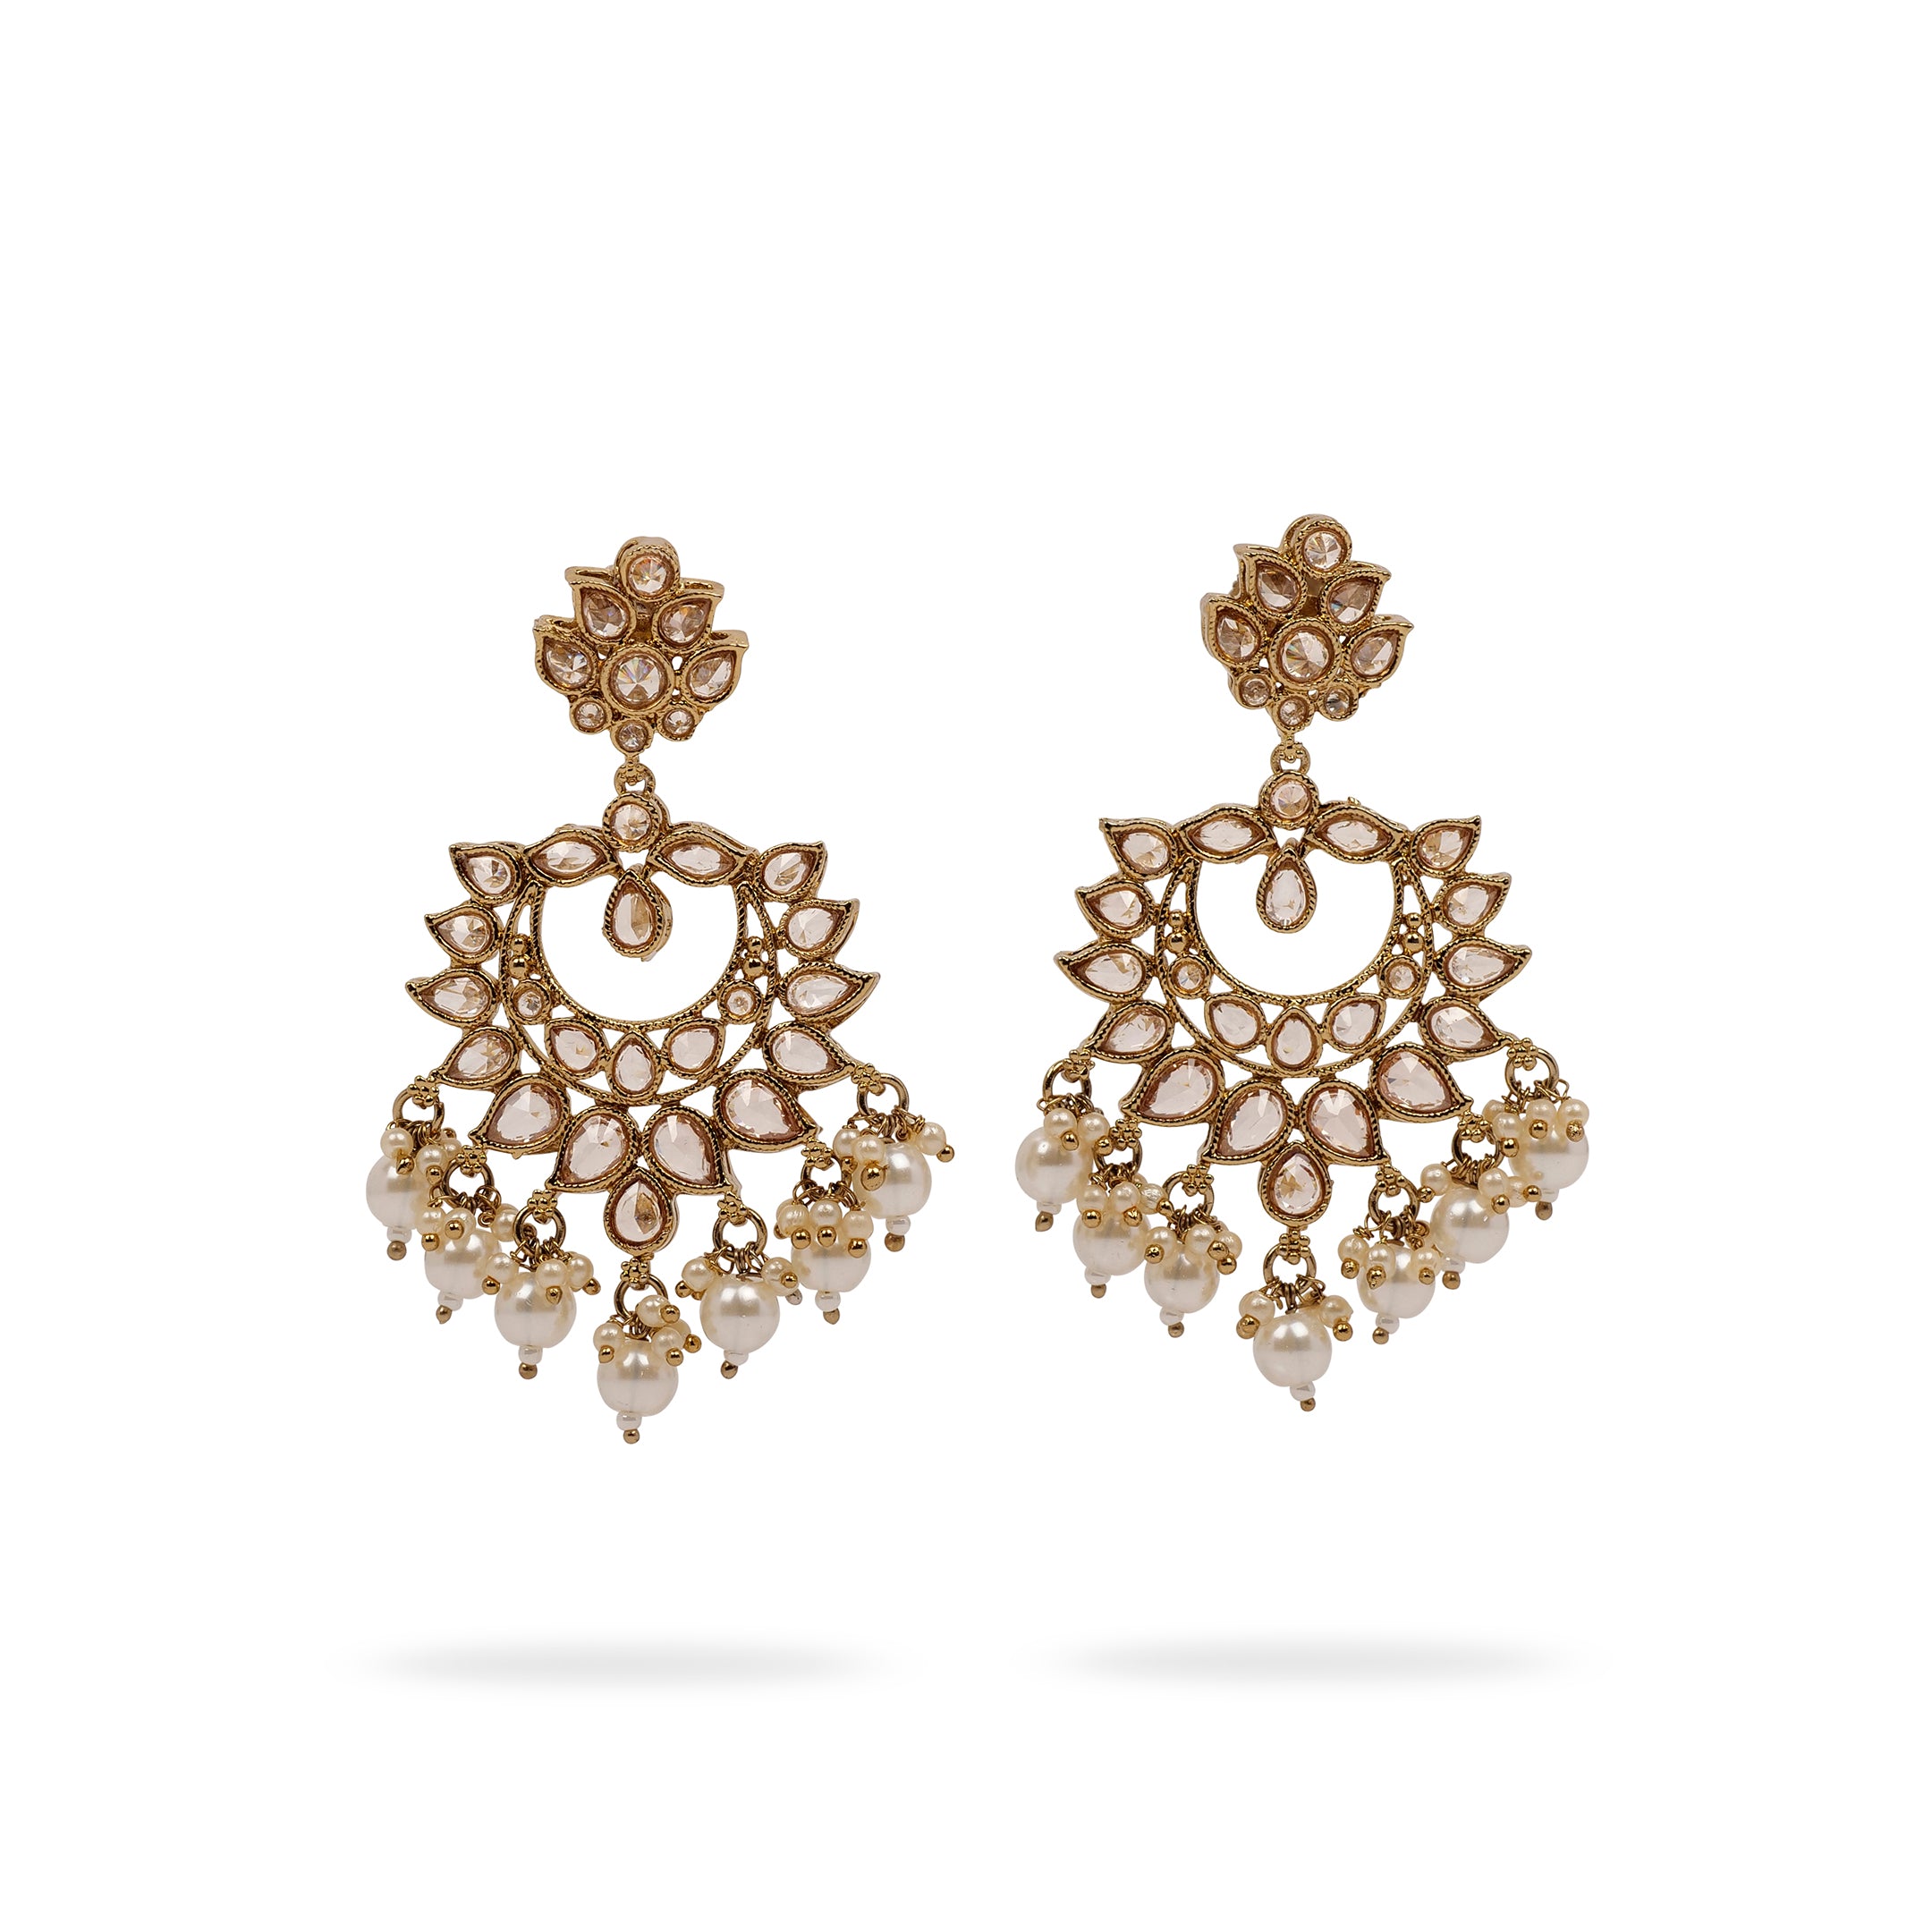 Niara Earrings in Pearl and Antique Gold